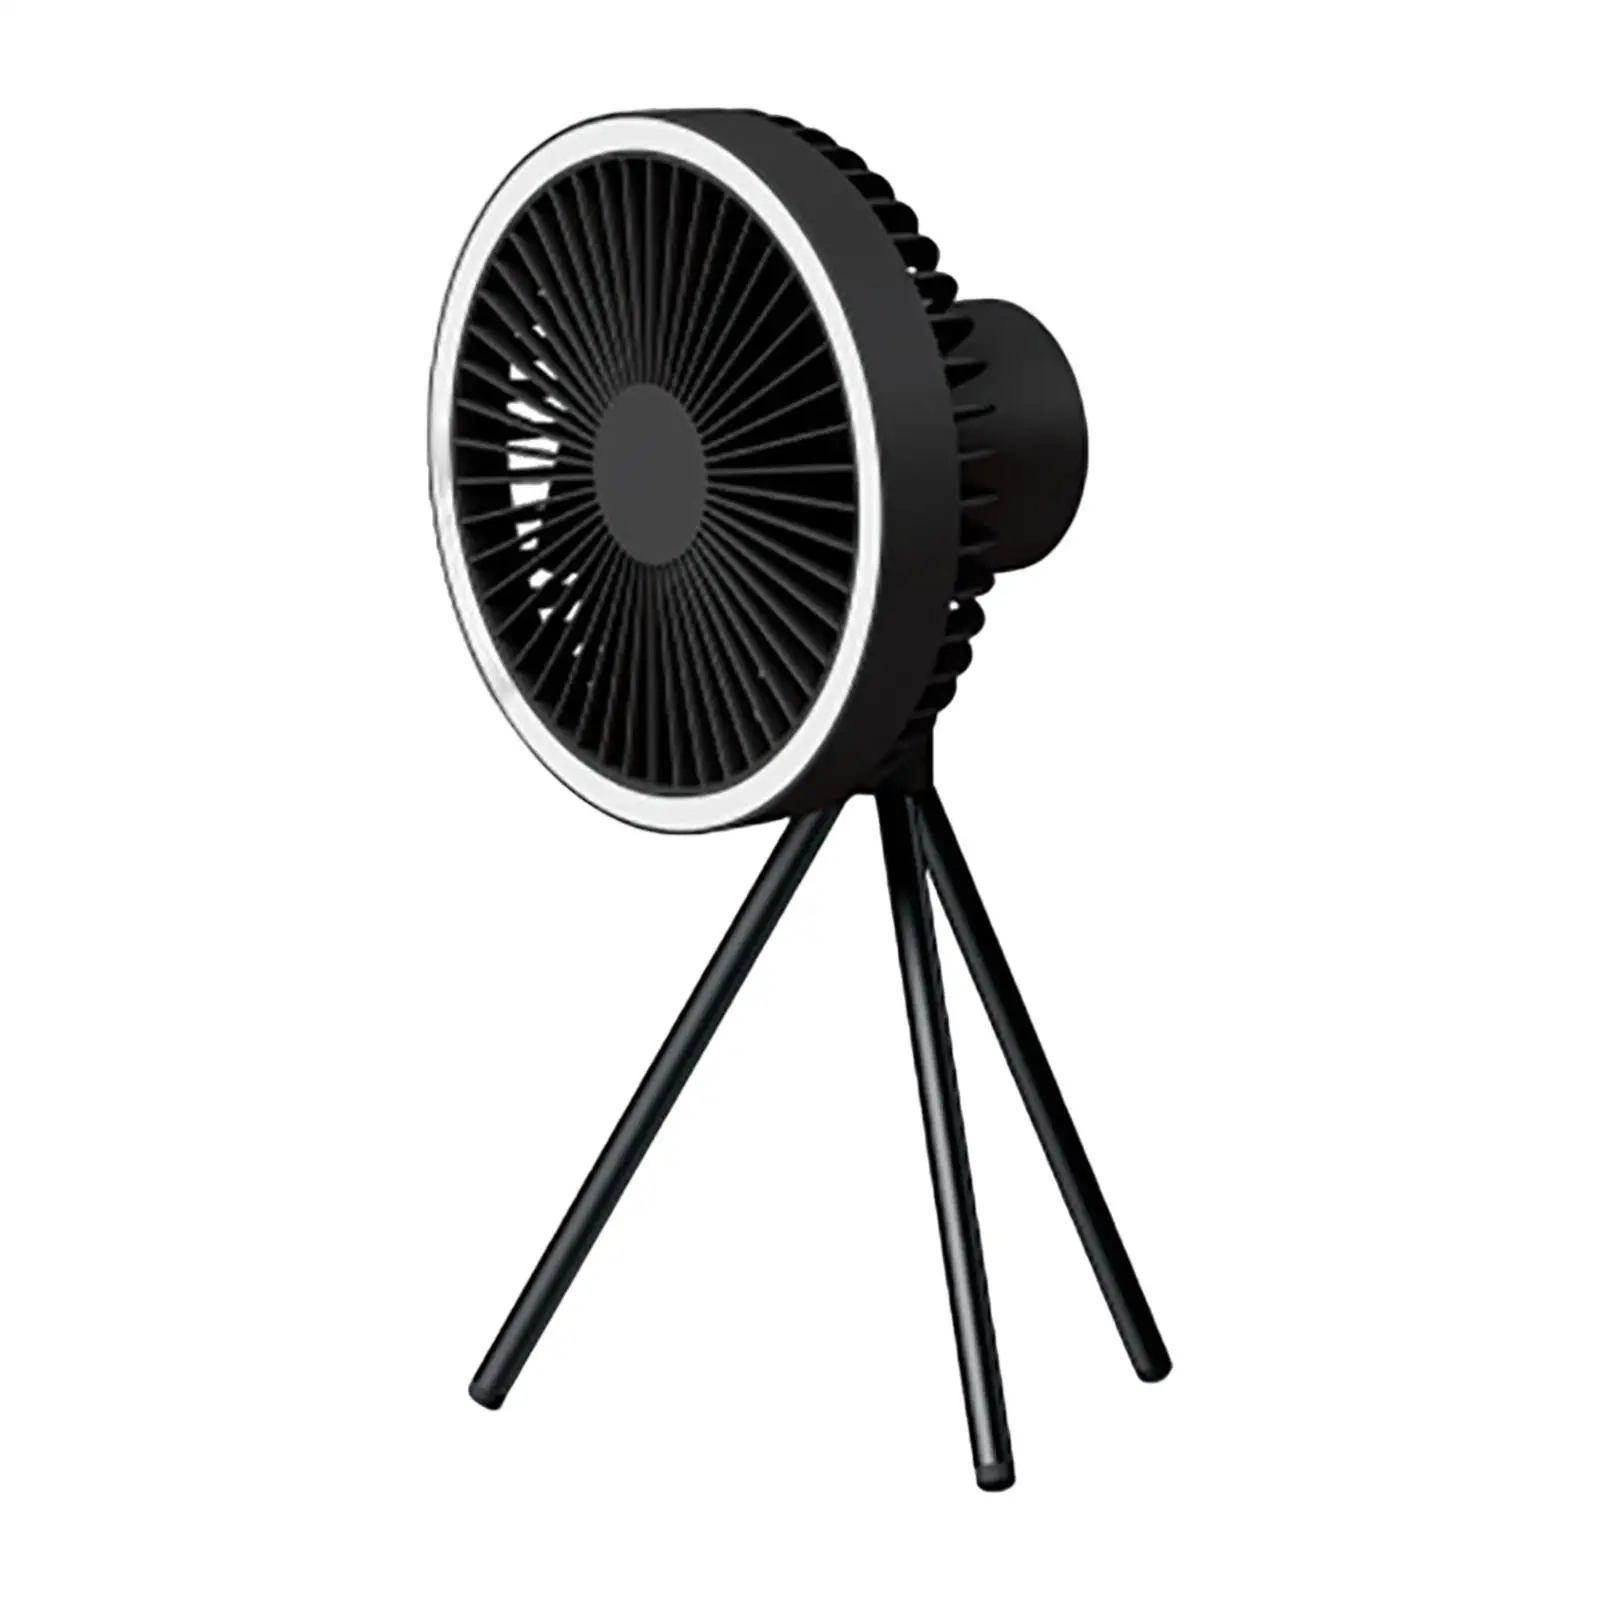 Air Circulator Fan Outdoor Camping Desk Fan with Tripod for Travel Tent Home